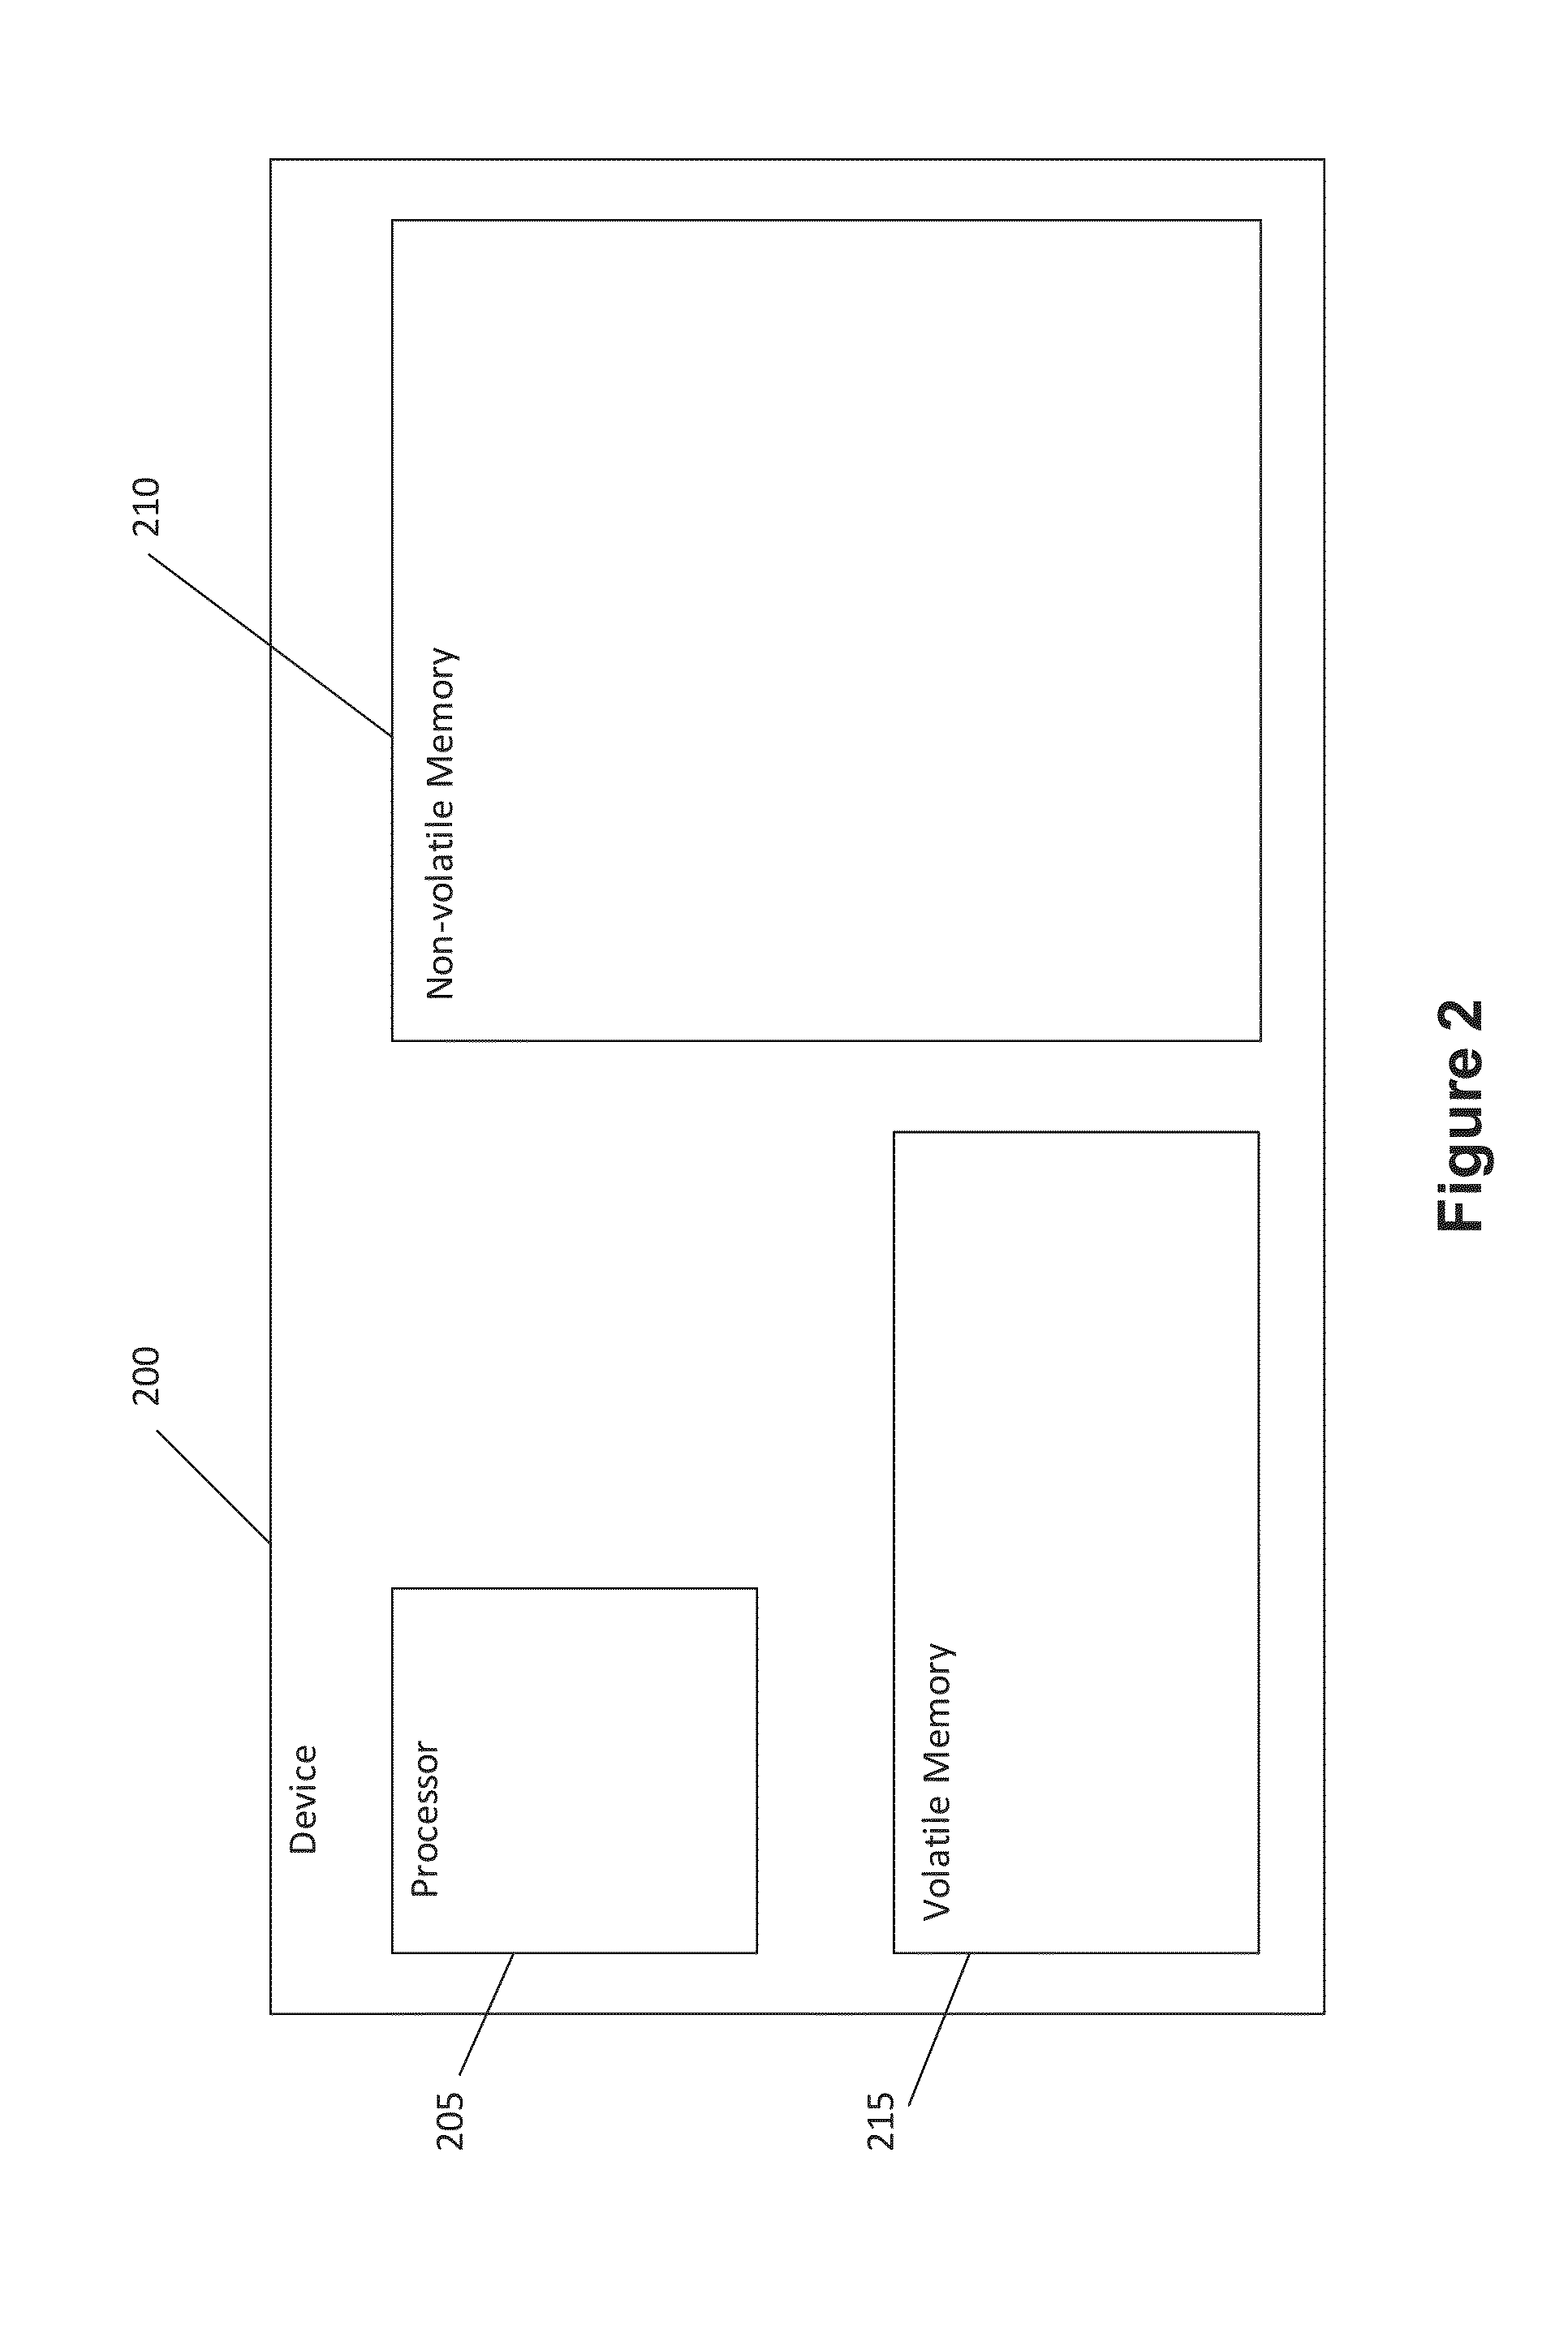 Systems and Methods for Satellite Image Processing to Estimate Crop Yield